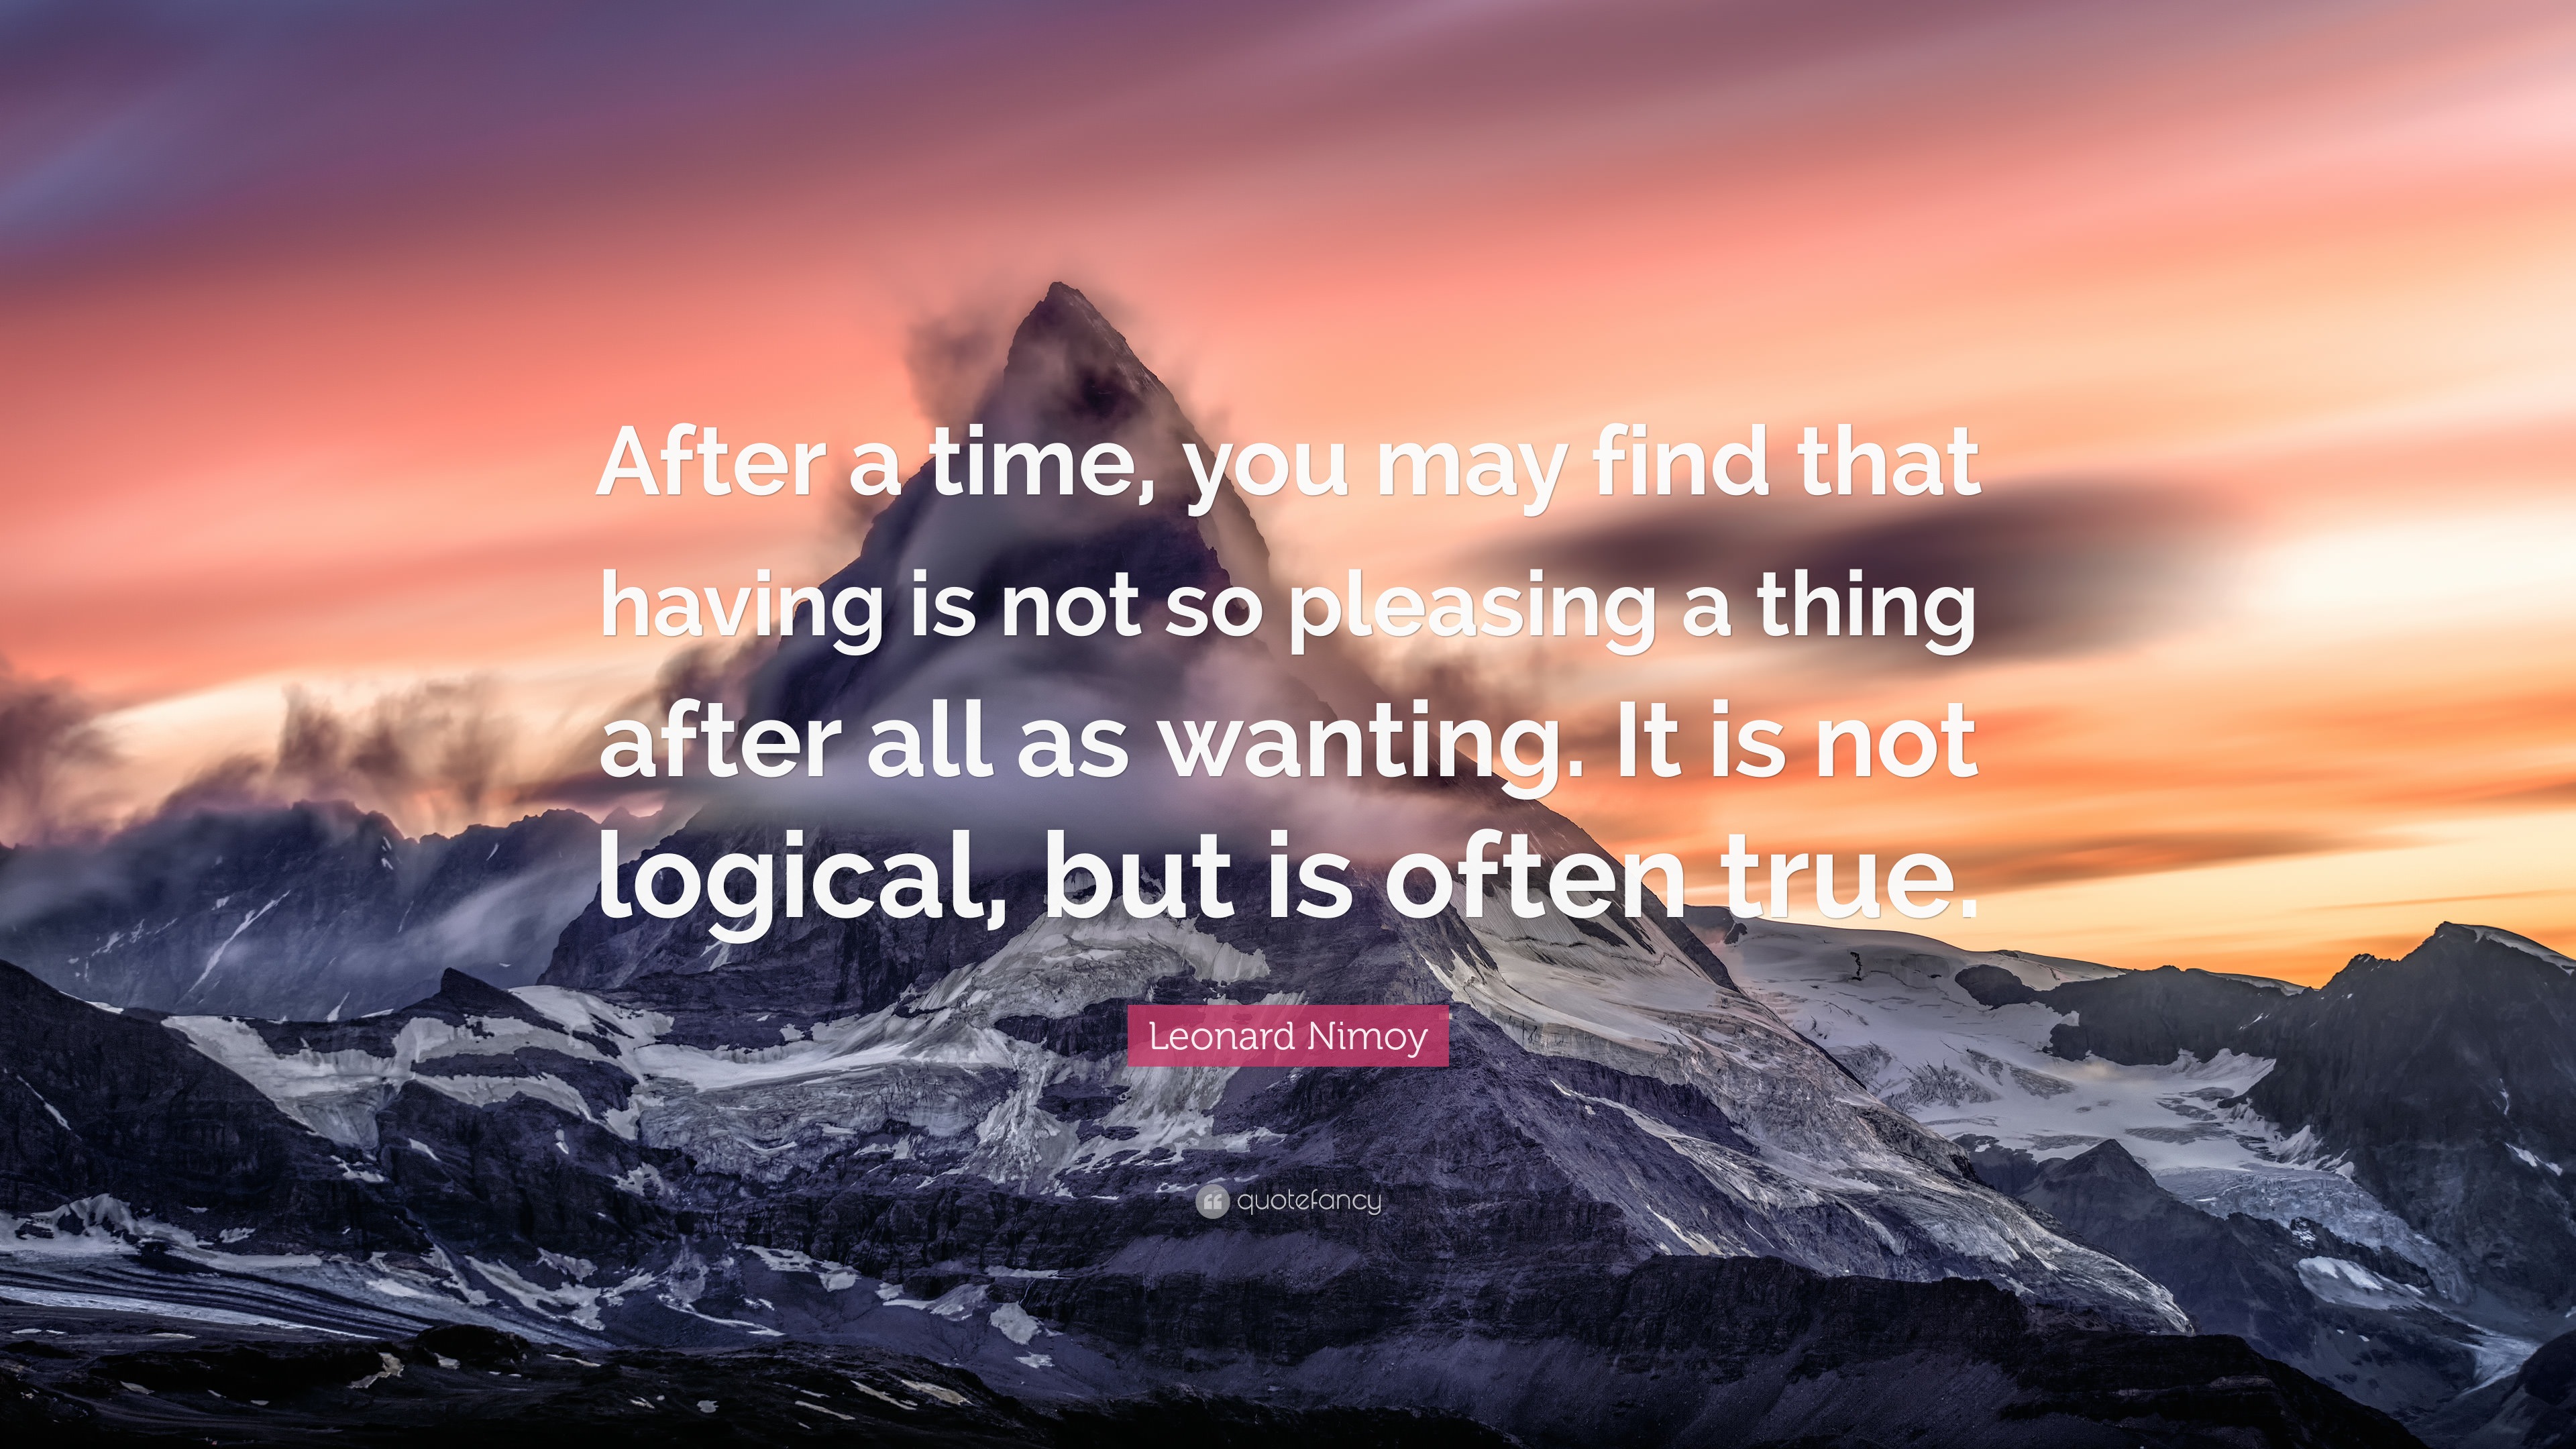 Leonard Nimoy Quote: “After a time, you may find that having is not so ...